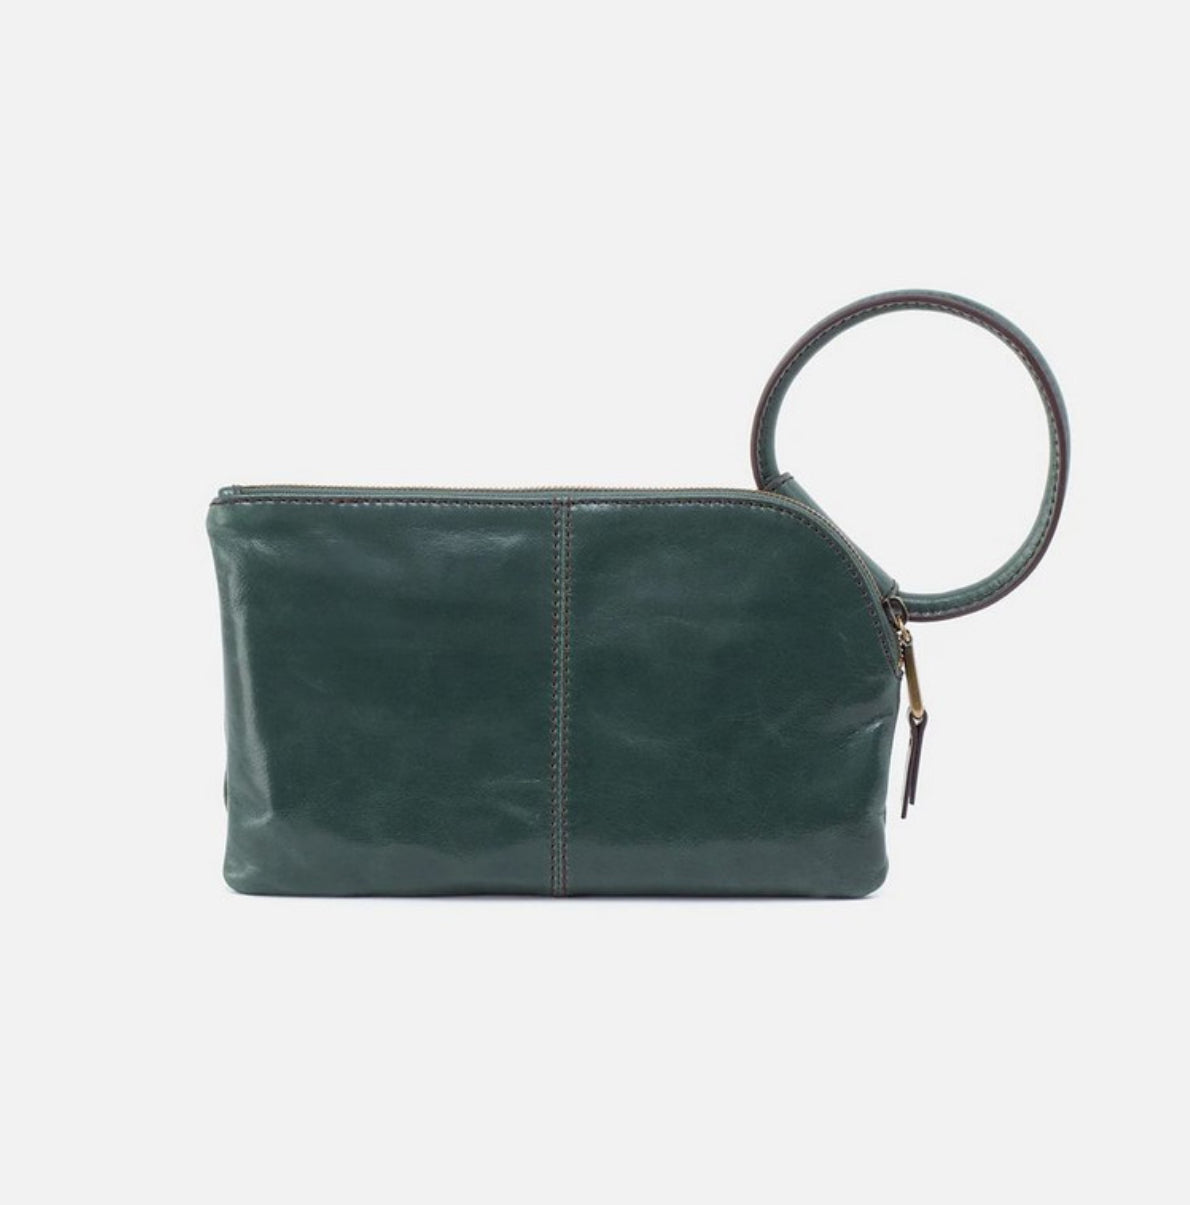 Sable Wristlet by HOBO in Sage Leaf - The Street Boutique 